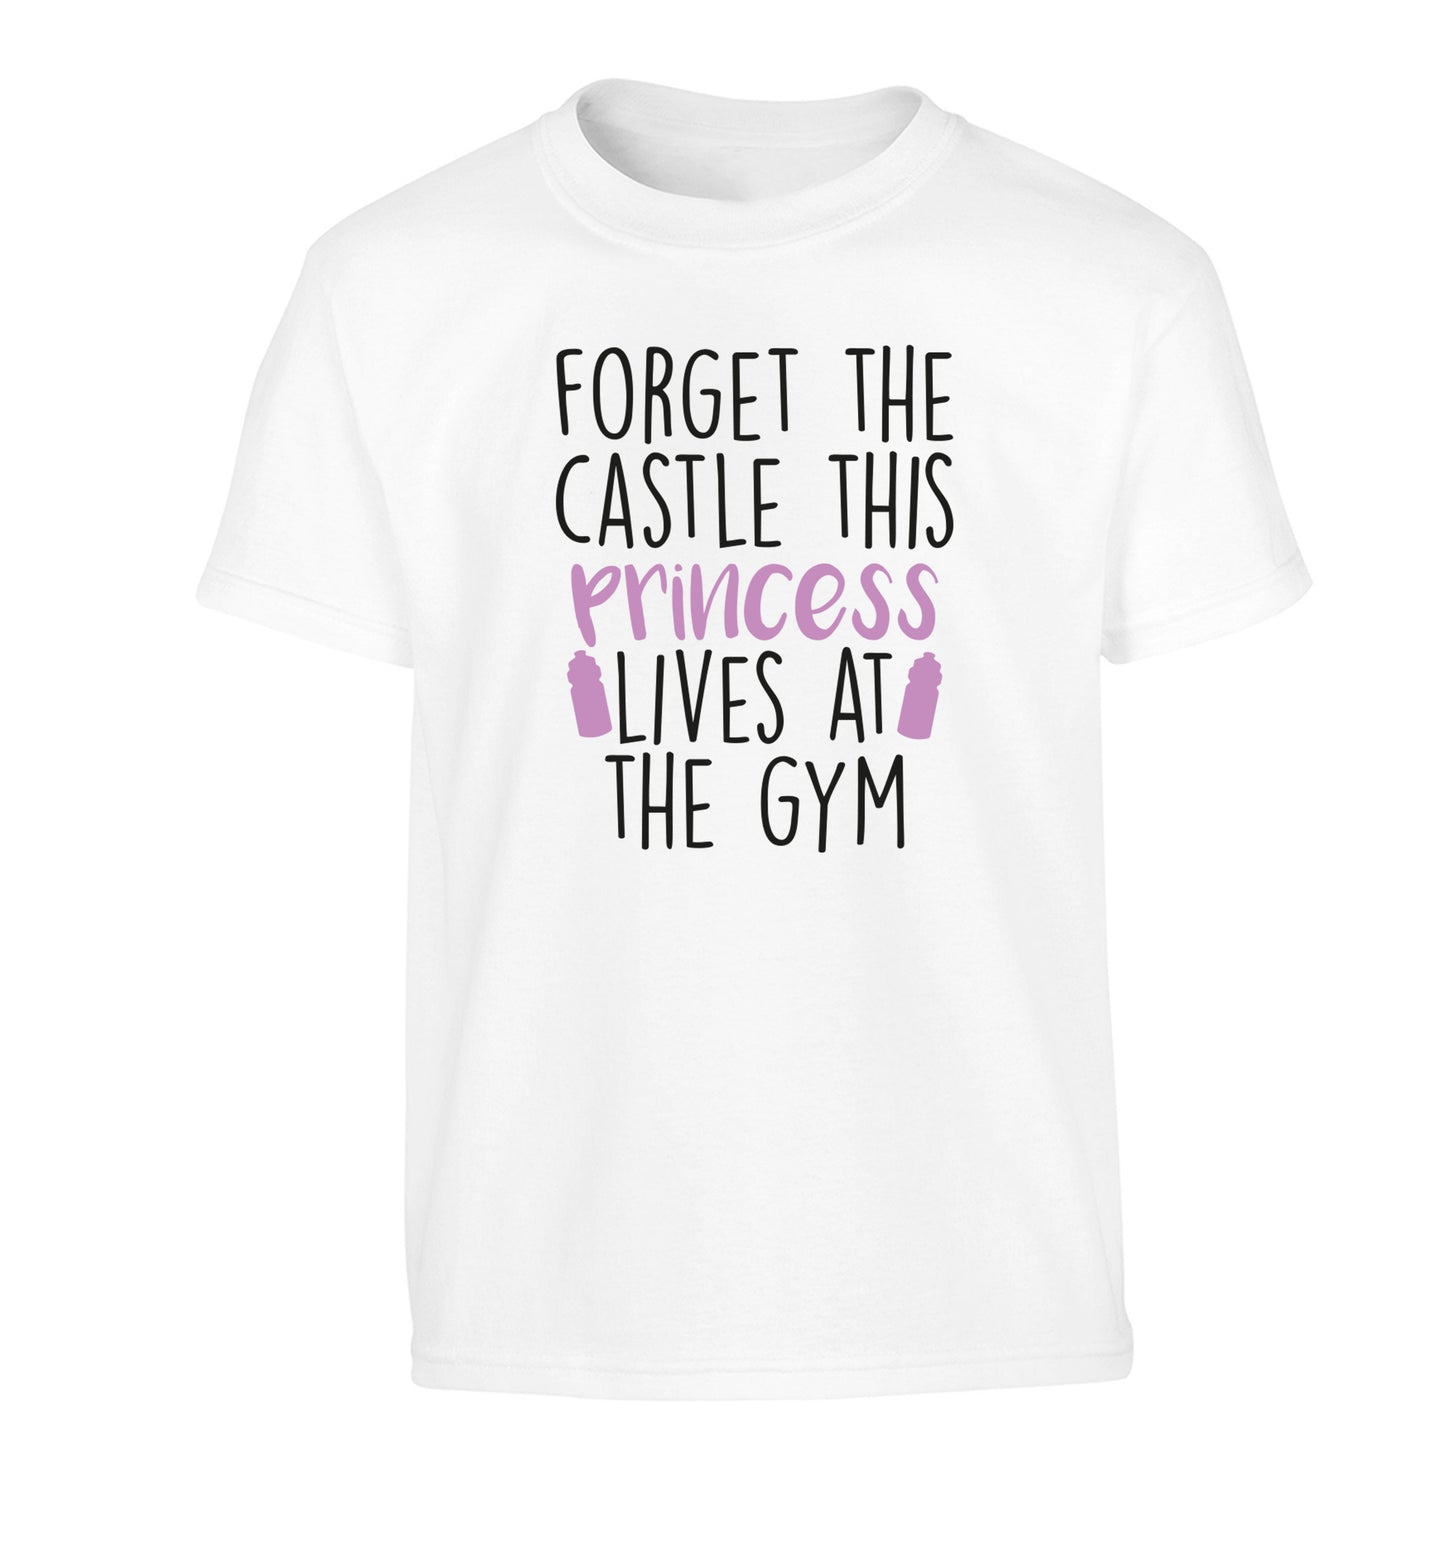 Forget the castle this princess lives at the gym Children's white Tshirt 12-14 Years